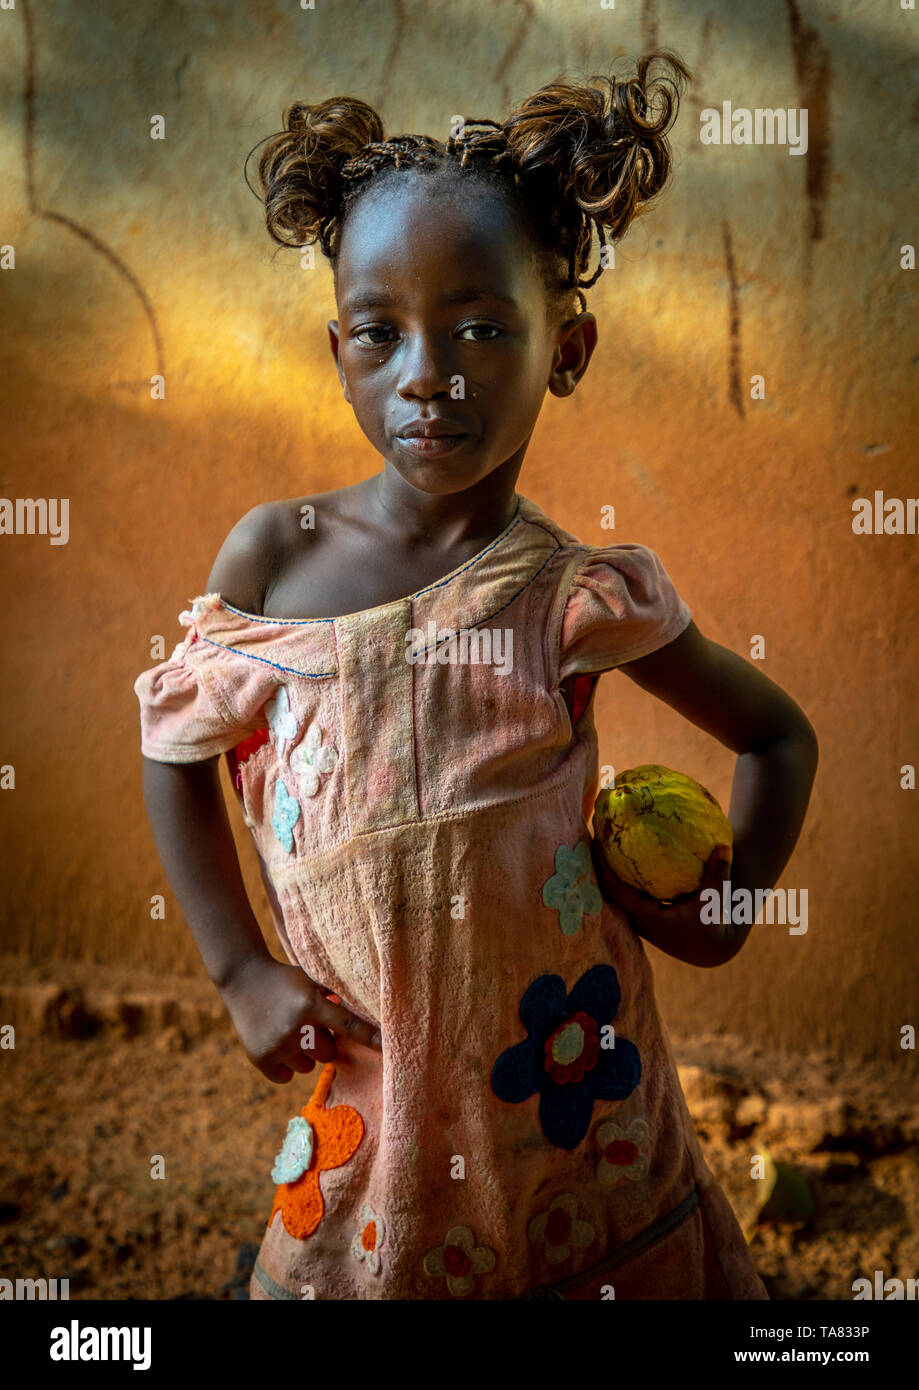 Cute african girl with a cocoa fruit pod in her hands, Savanes district, Yamoussoukro, Ivory Coast Stock Photo